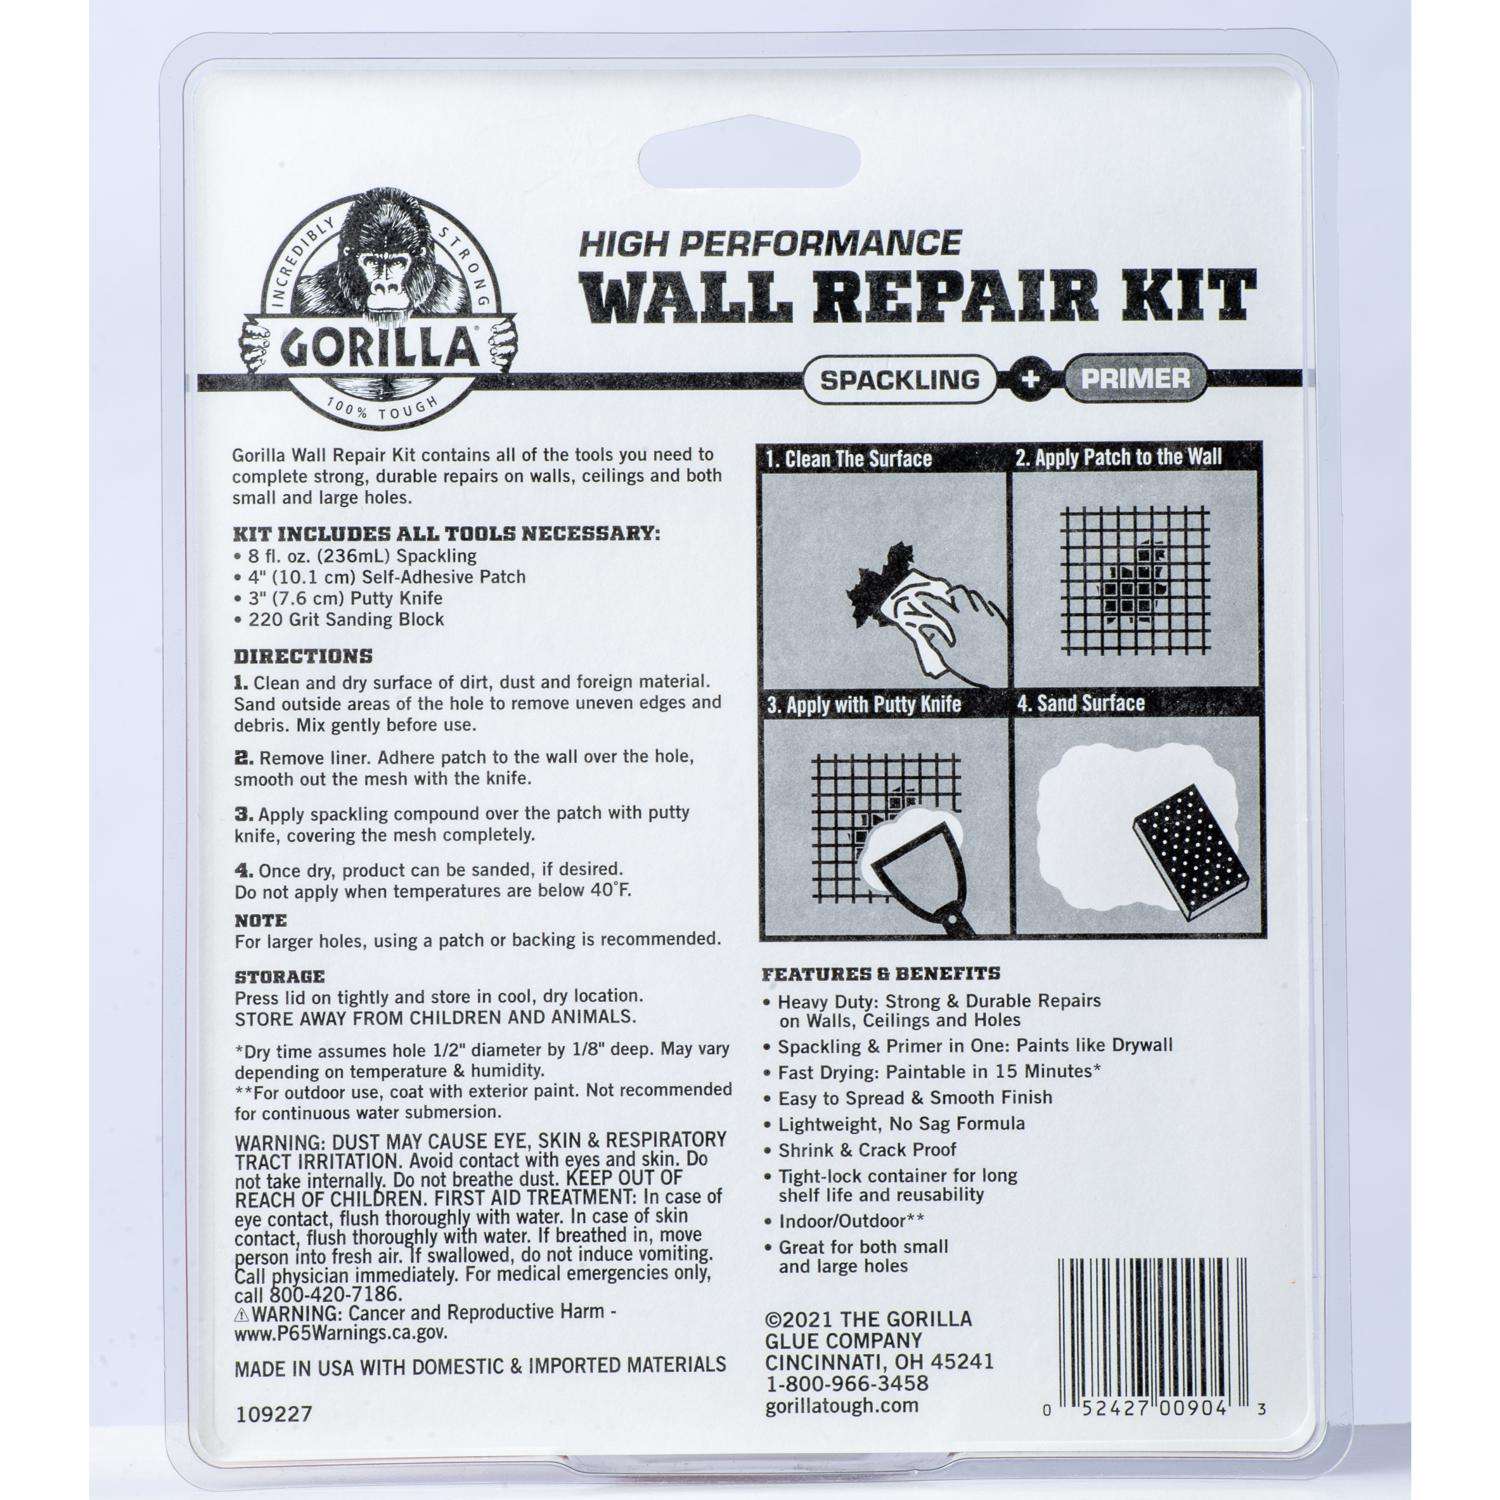 Ace 4 in. L X 4 in. W Reinforced Aluminum White Self Adhesive Wall Repair  Patch - Ace Hardware